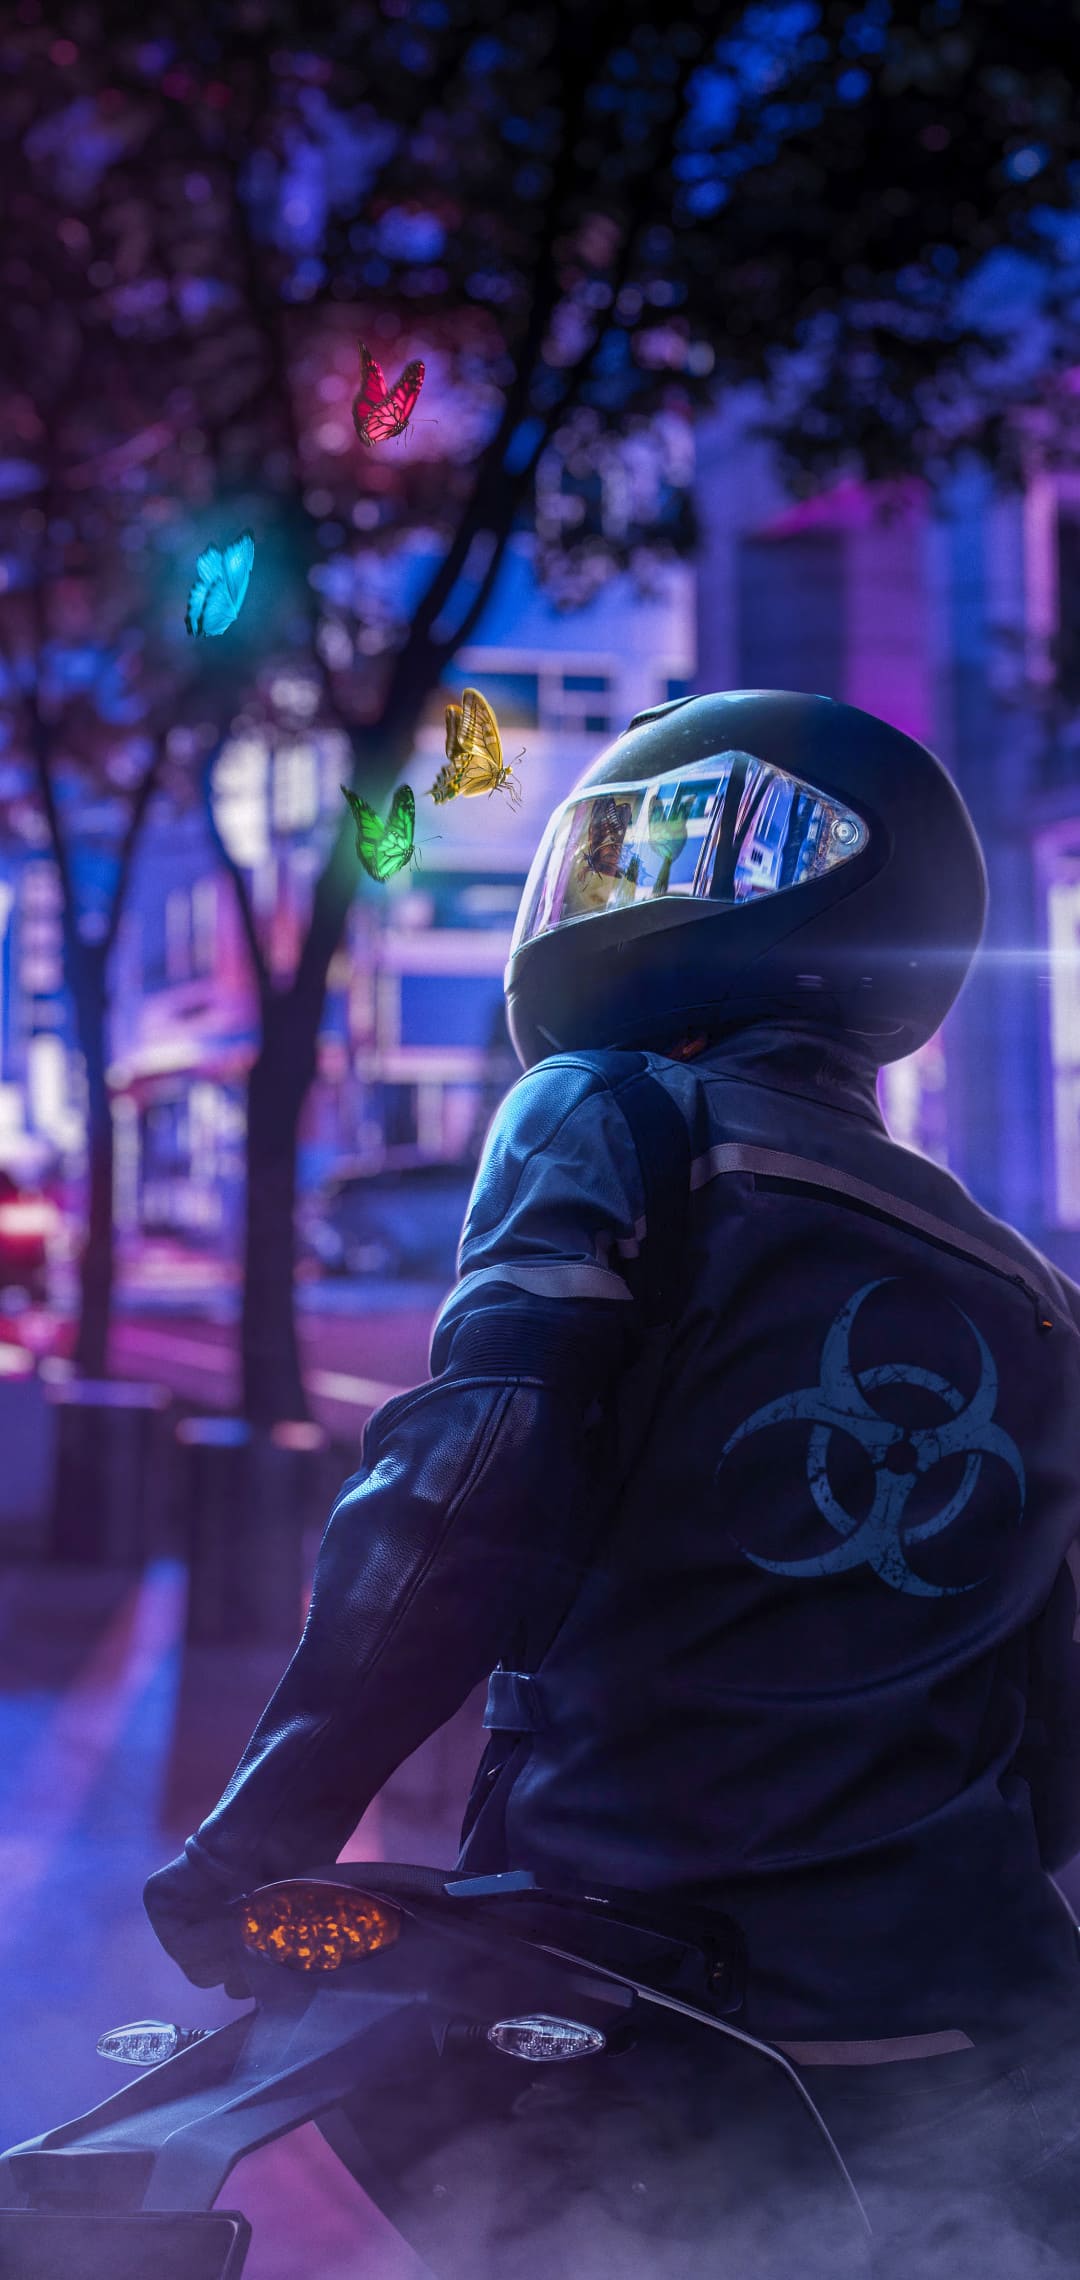 A man in a helmet on a motorcycle with neon butterflies around him - Cool